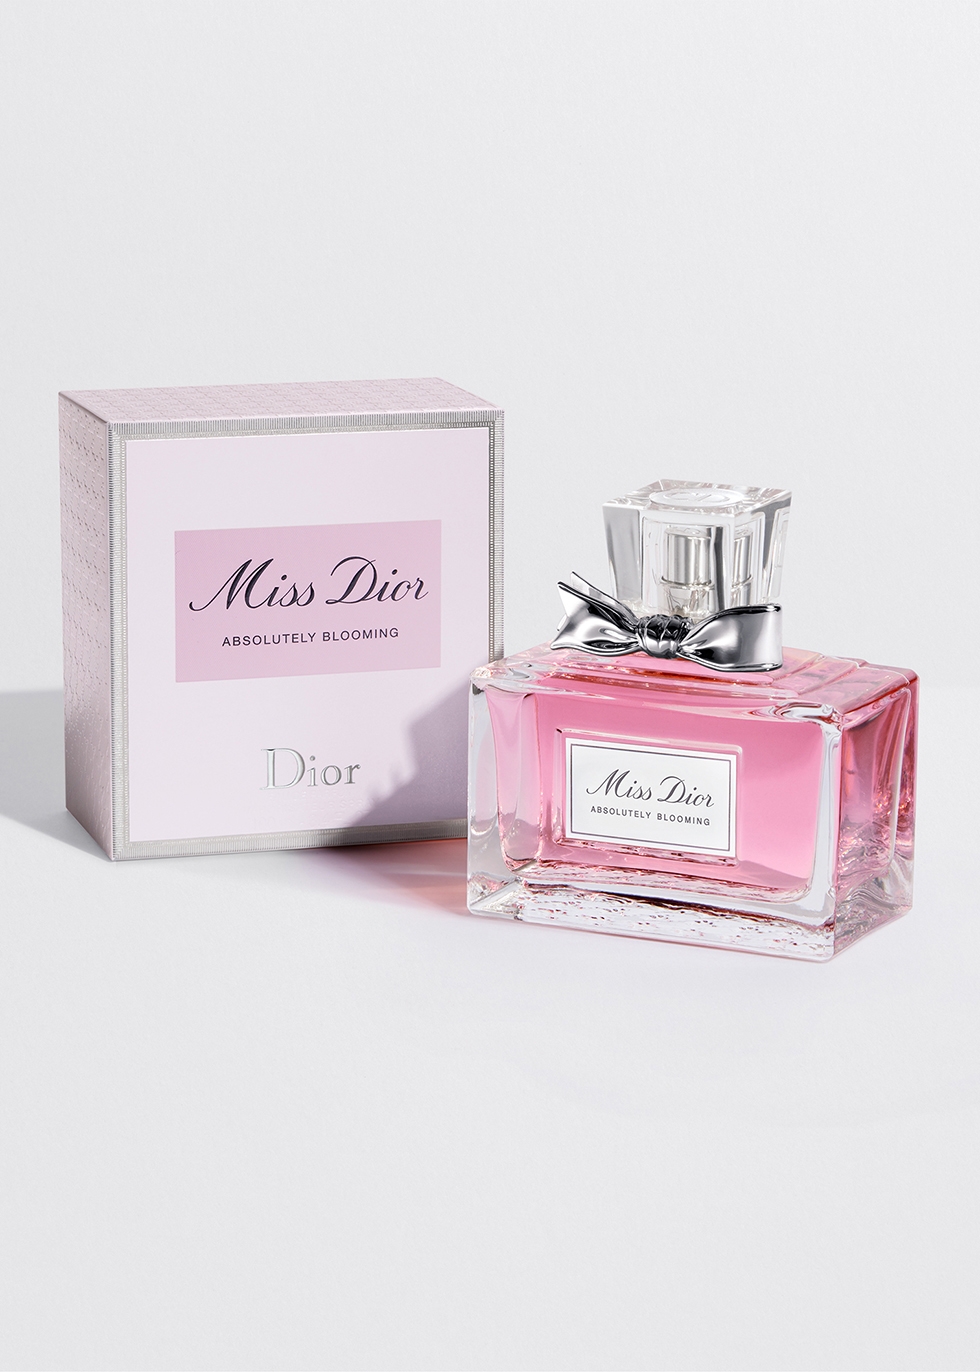 miss dior perfume absolutely blooming 50ml